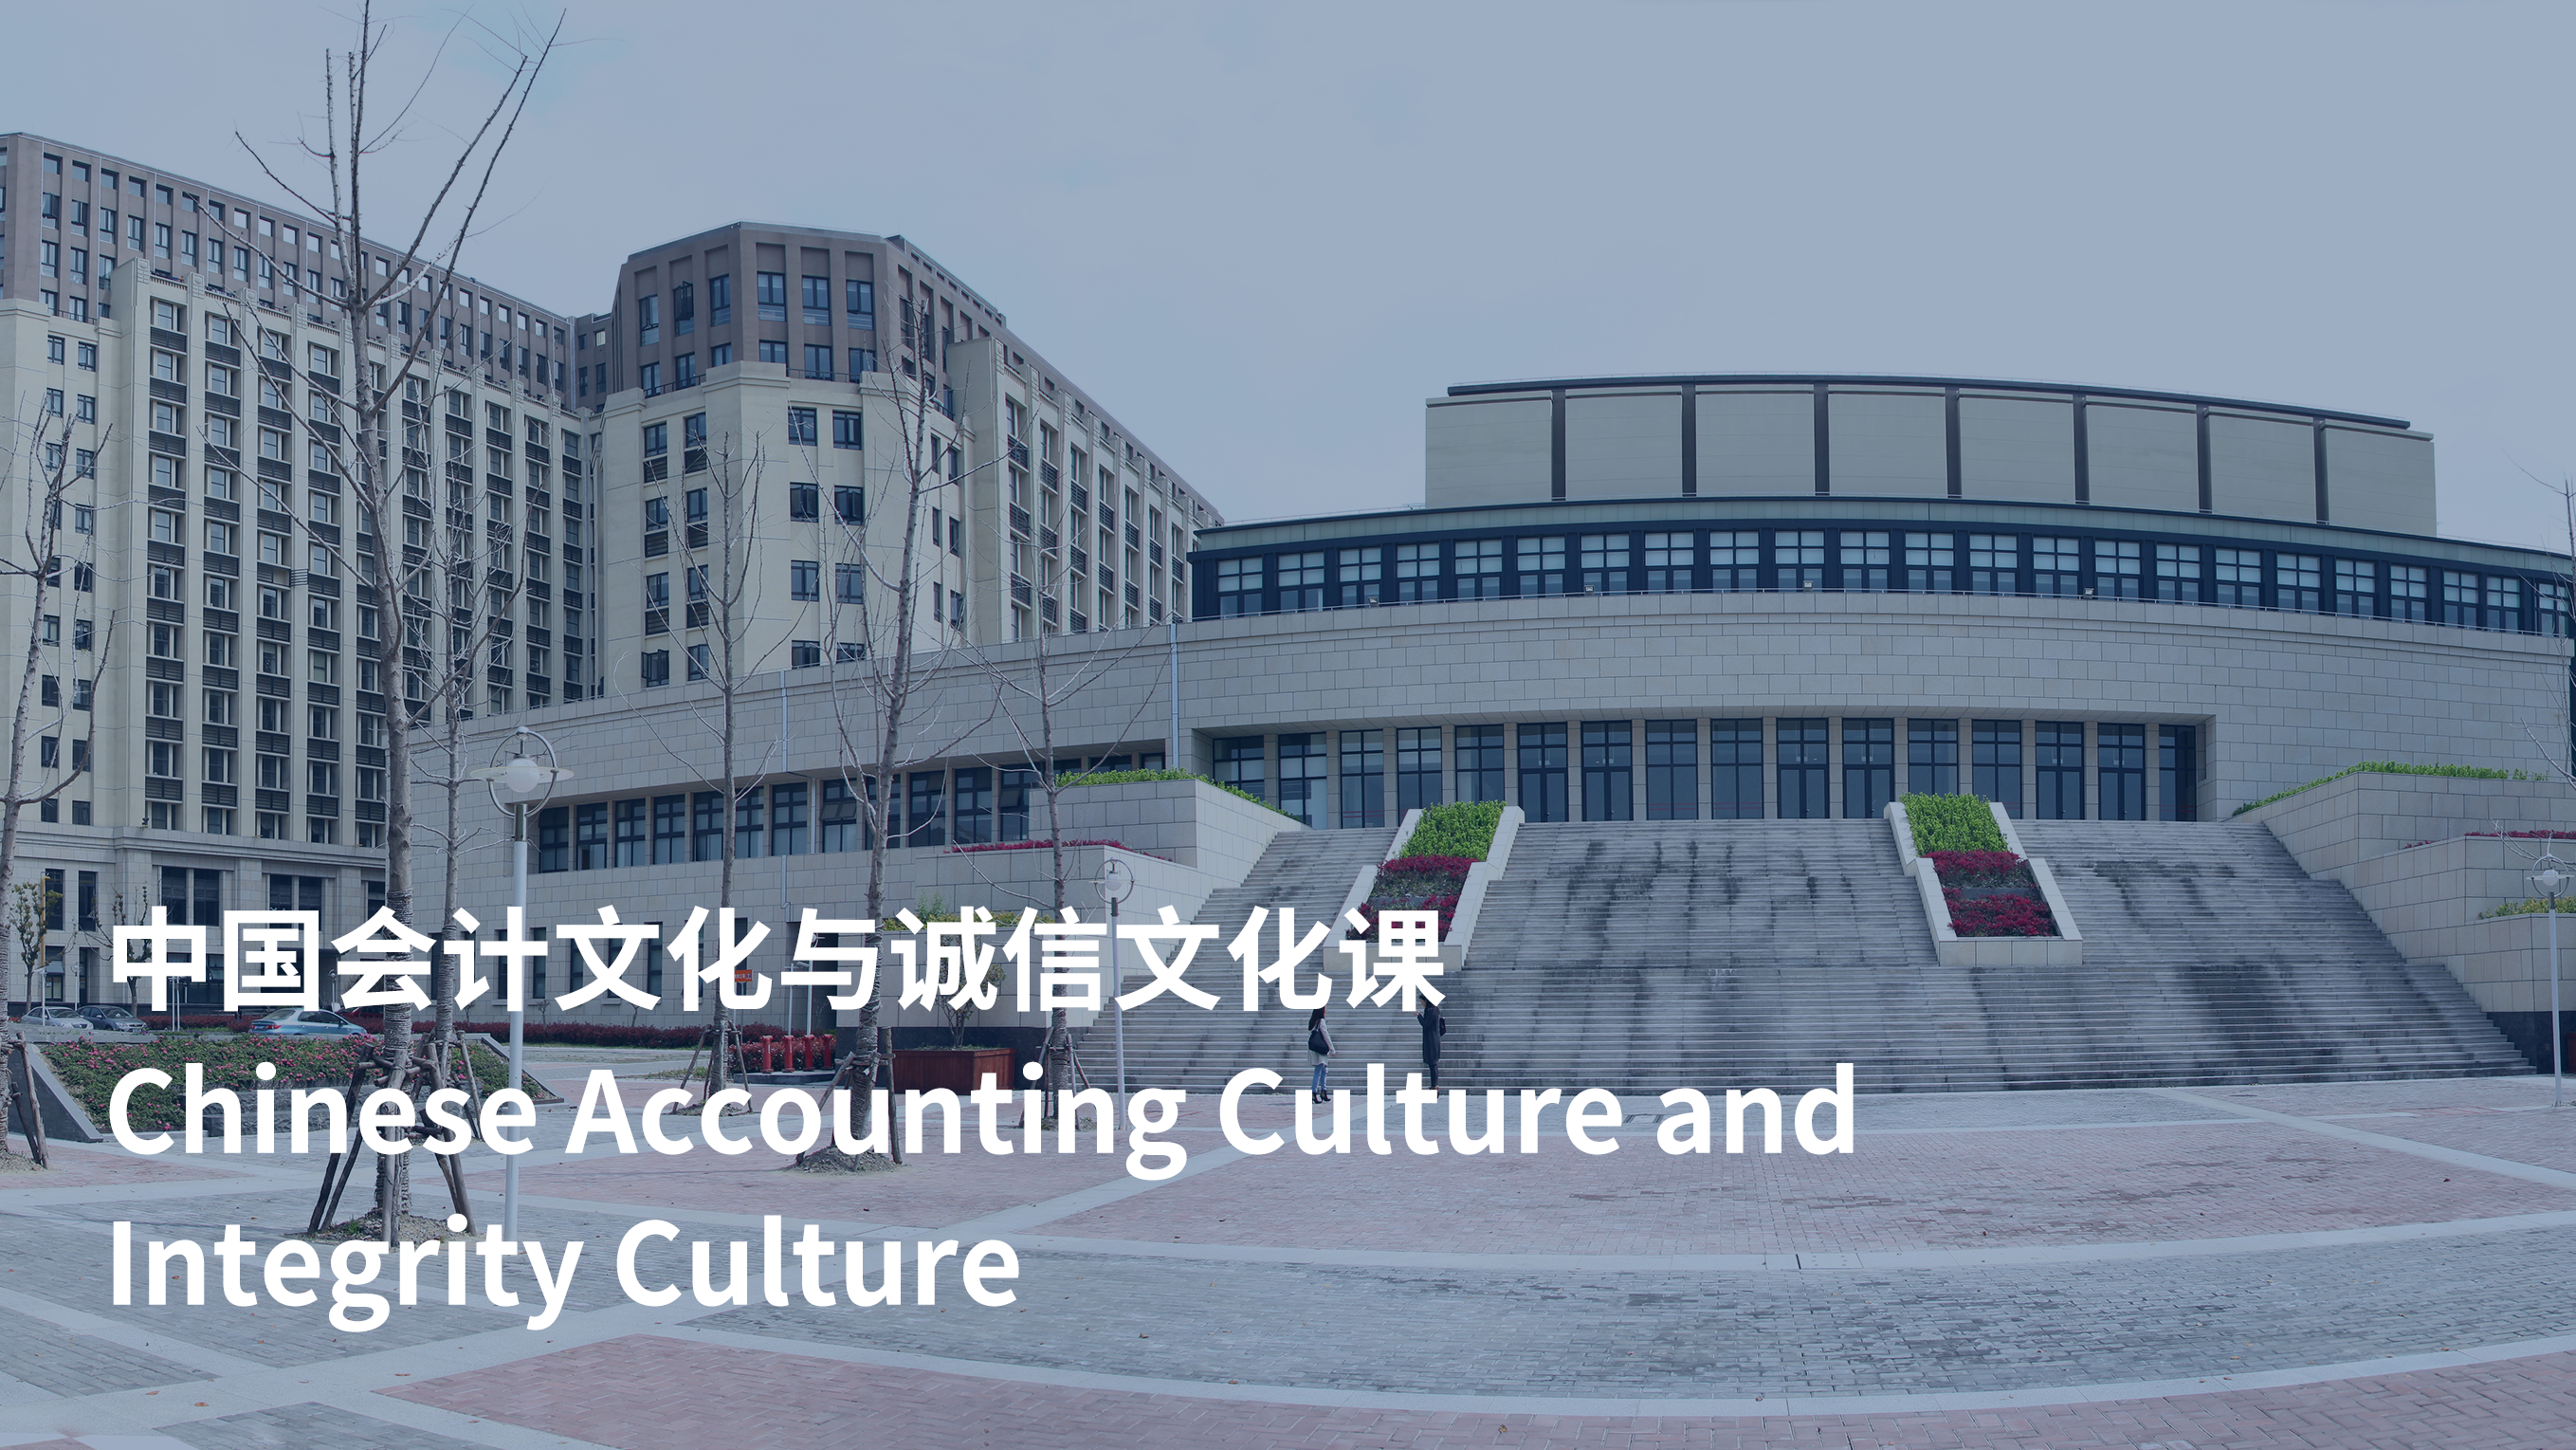 Chinese Accounting Culture and Integrity Culture